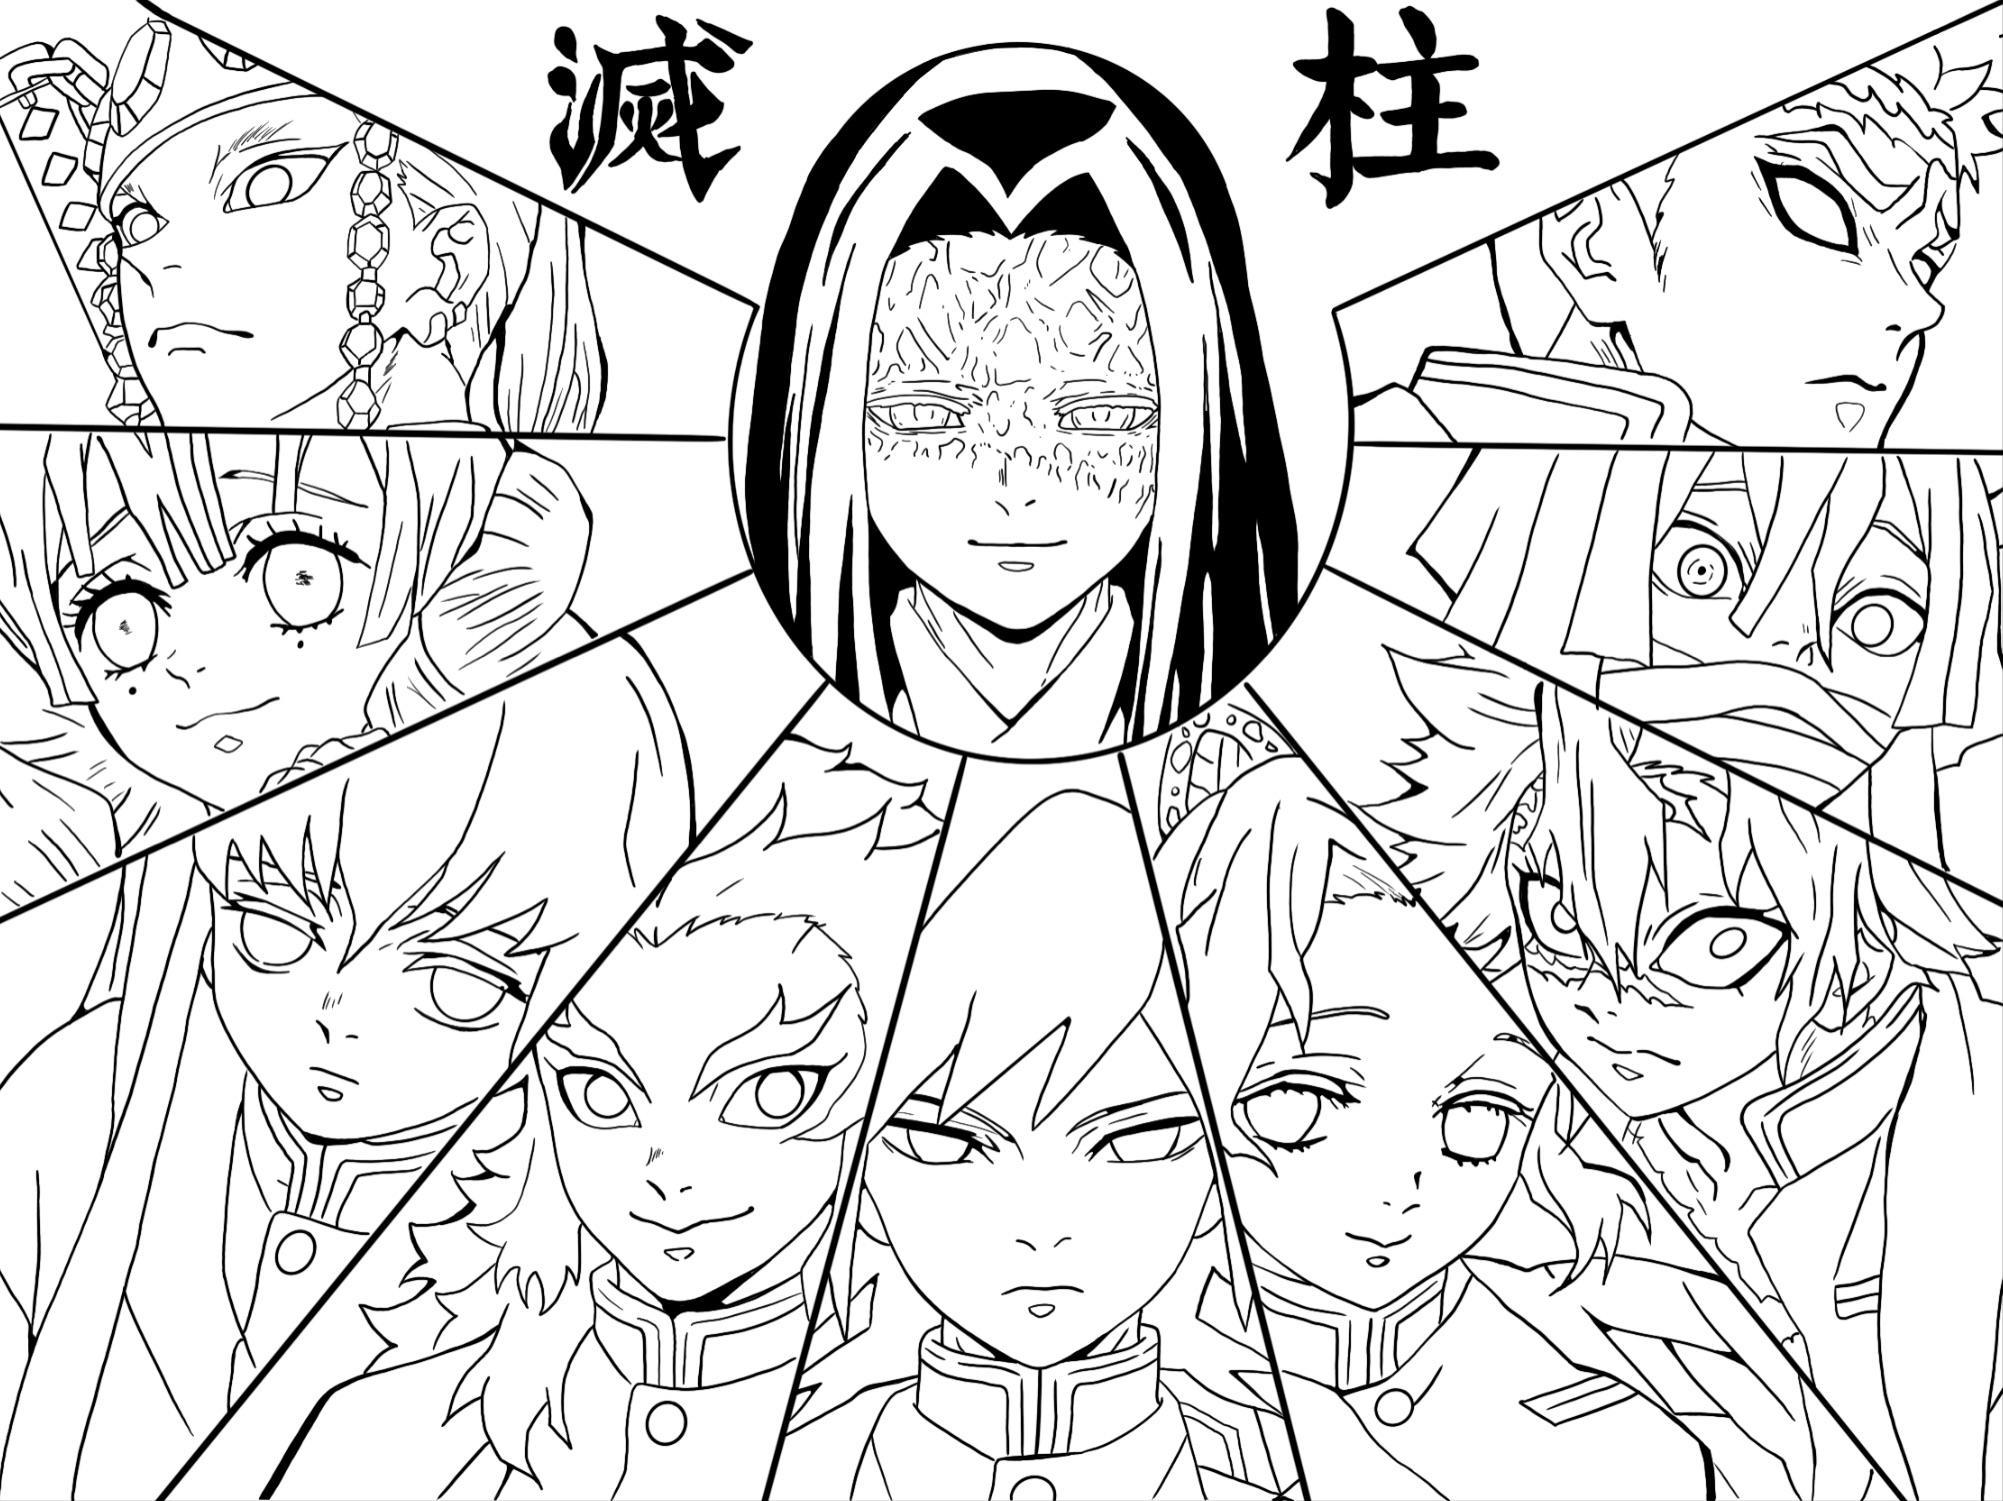 BNSD Slayer Coloring Page